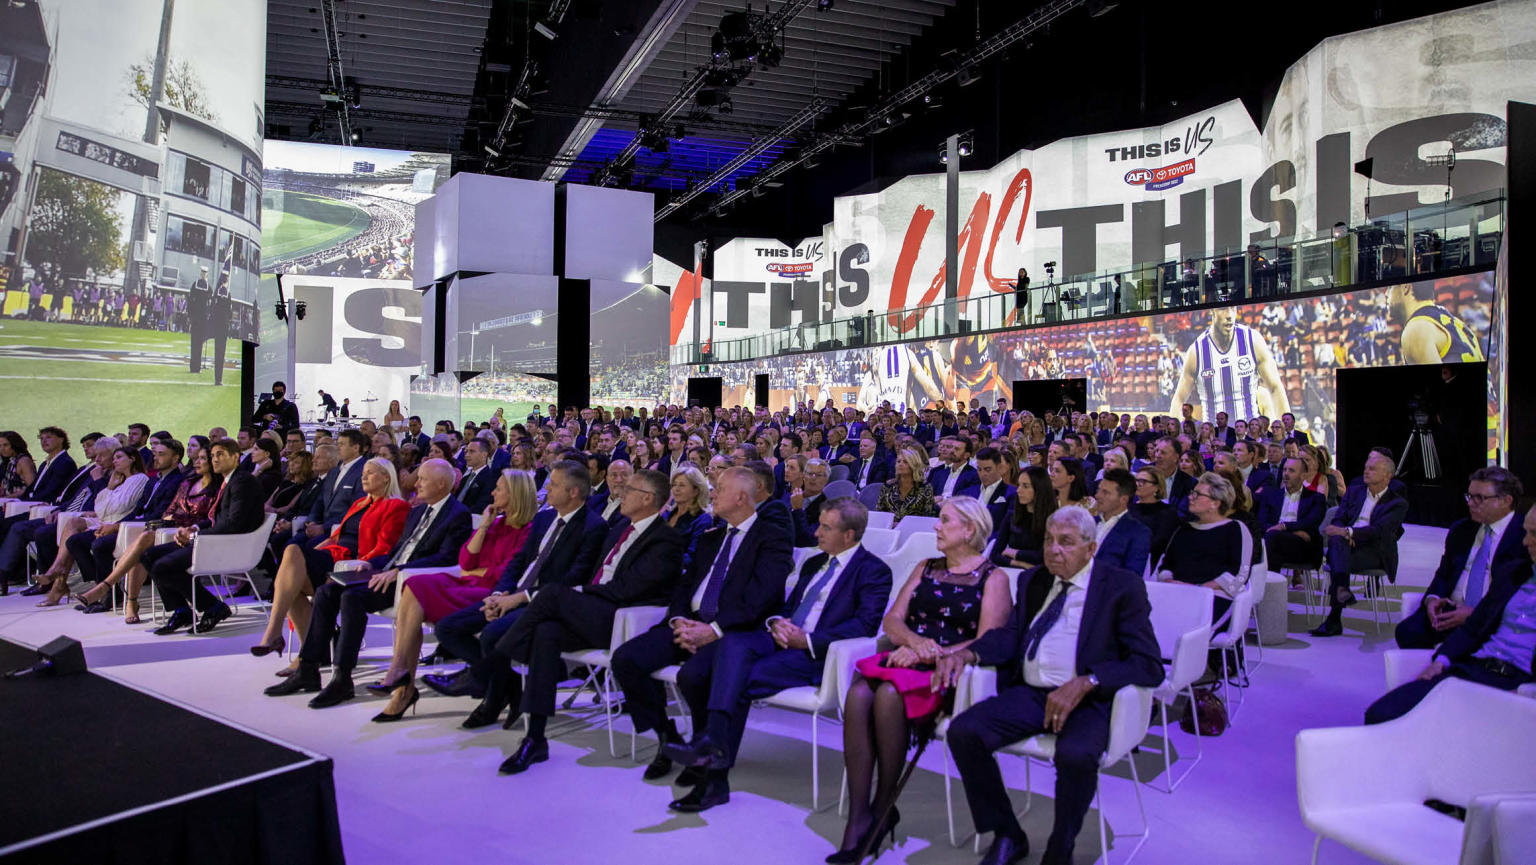 A seated audience in rows, attentively facing a stage, while immersive digital screens adorn the surrounding walls.